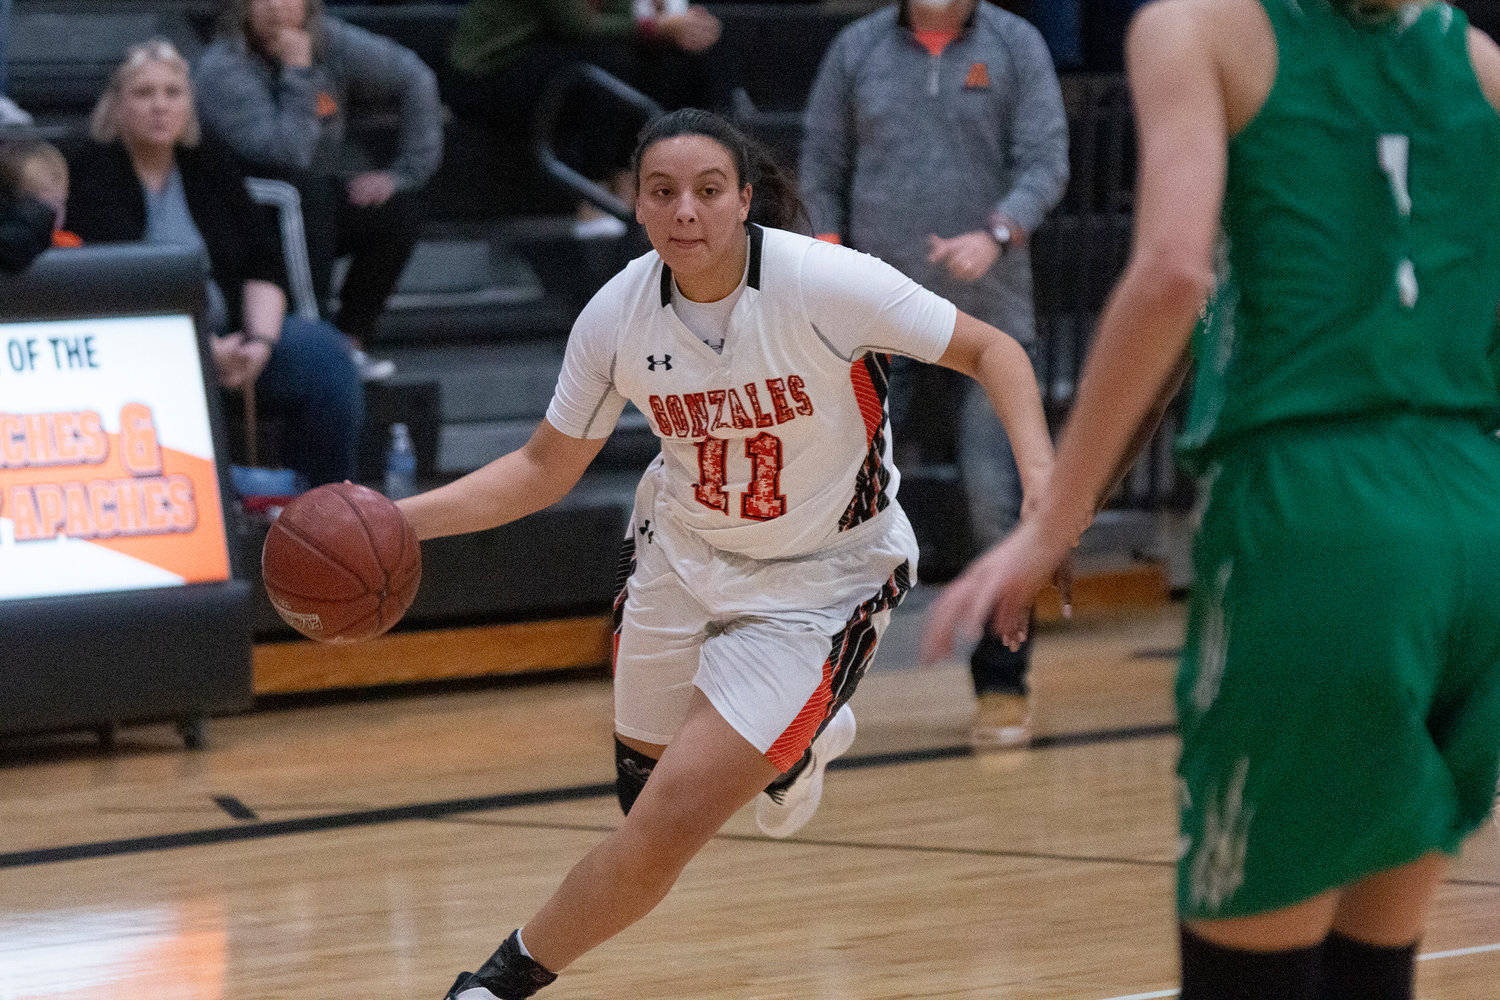 Hailey Riojas led the team in scoring with 14 points in Gonzales’ 38-30 victory over Cuero. Riojas scored from all over the court, including from inside the paint as well as three three pointers.